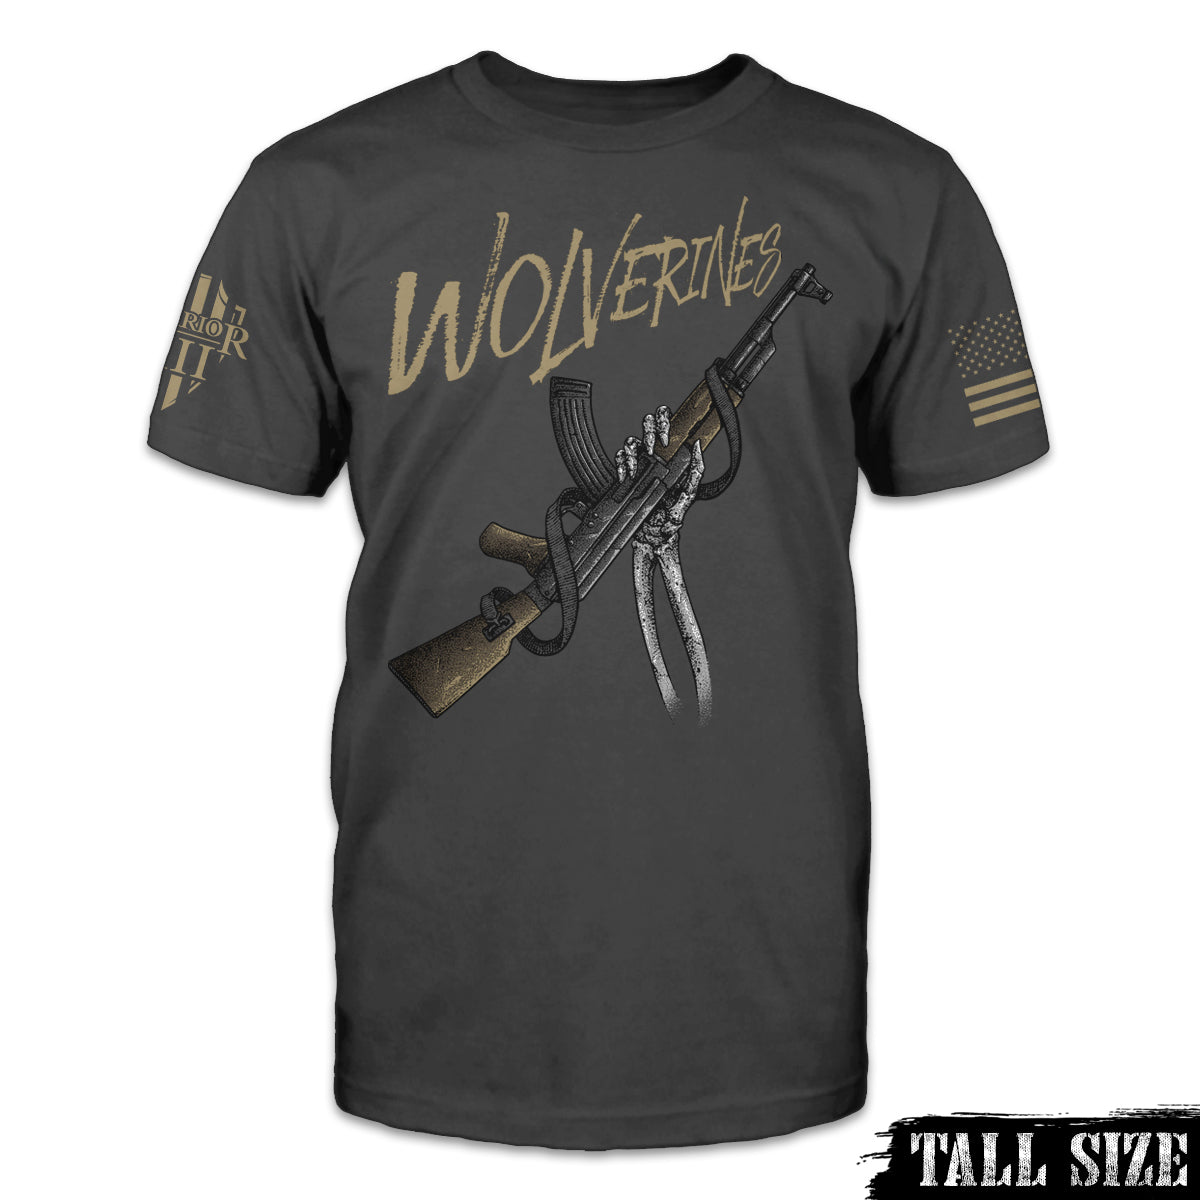 A dark grey tall size shirt with the word "Wolverines" and a skeleton arm holding a gun printed on the front of the shirt.